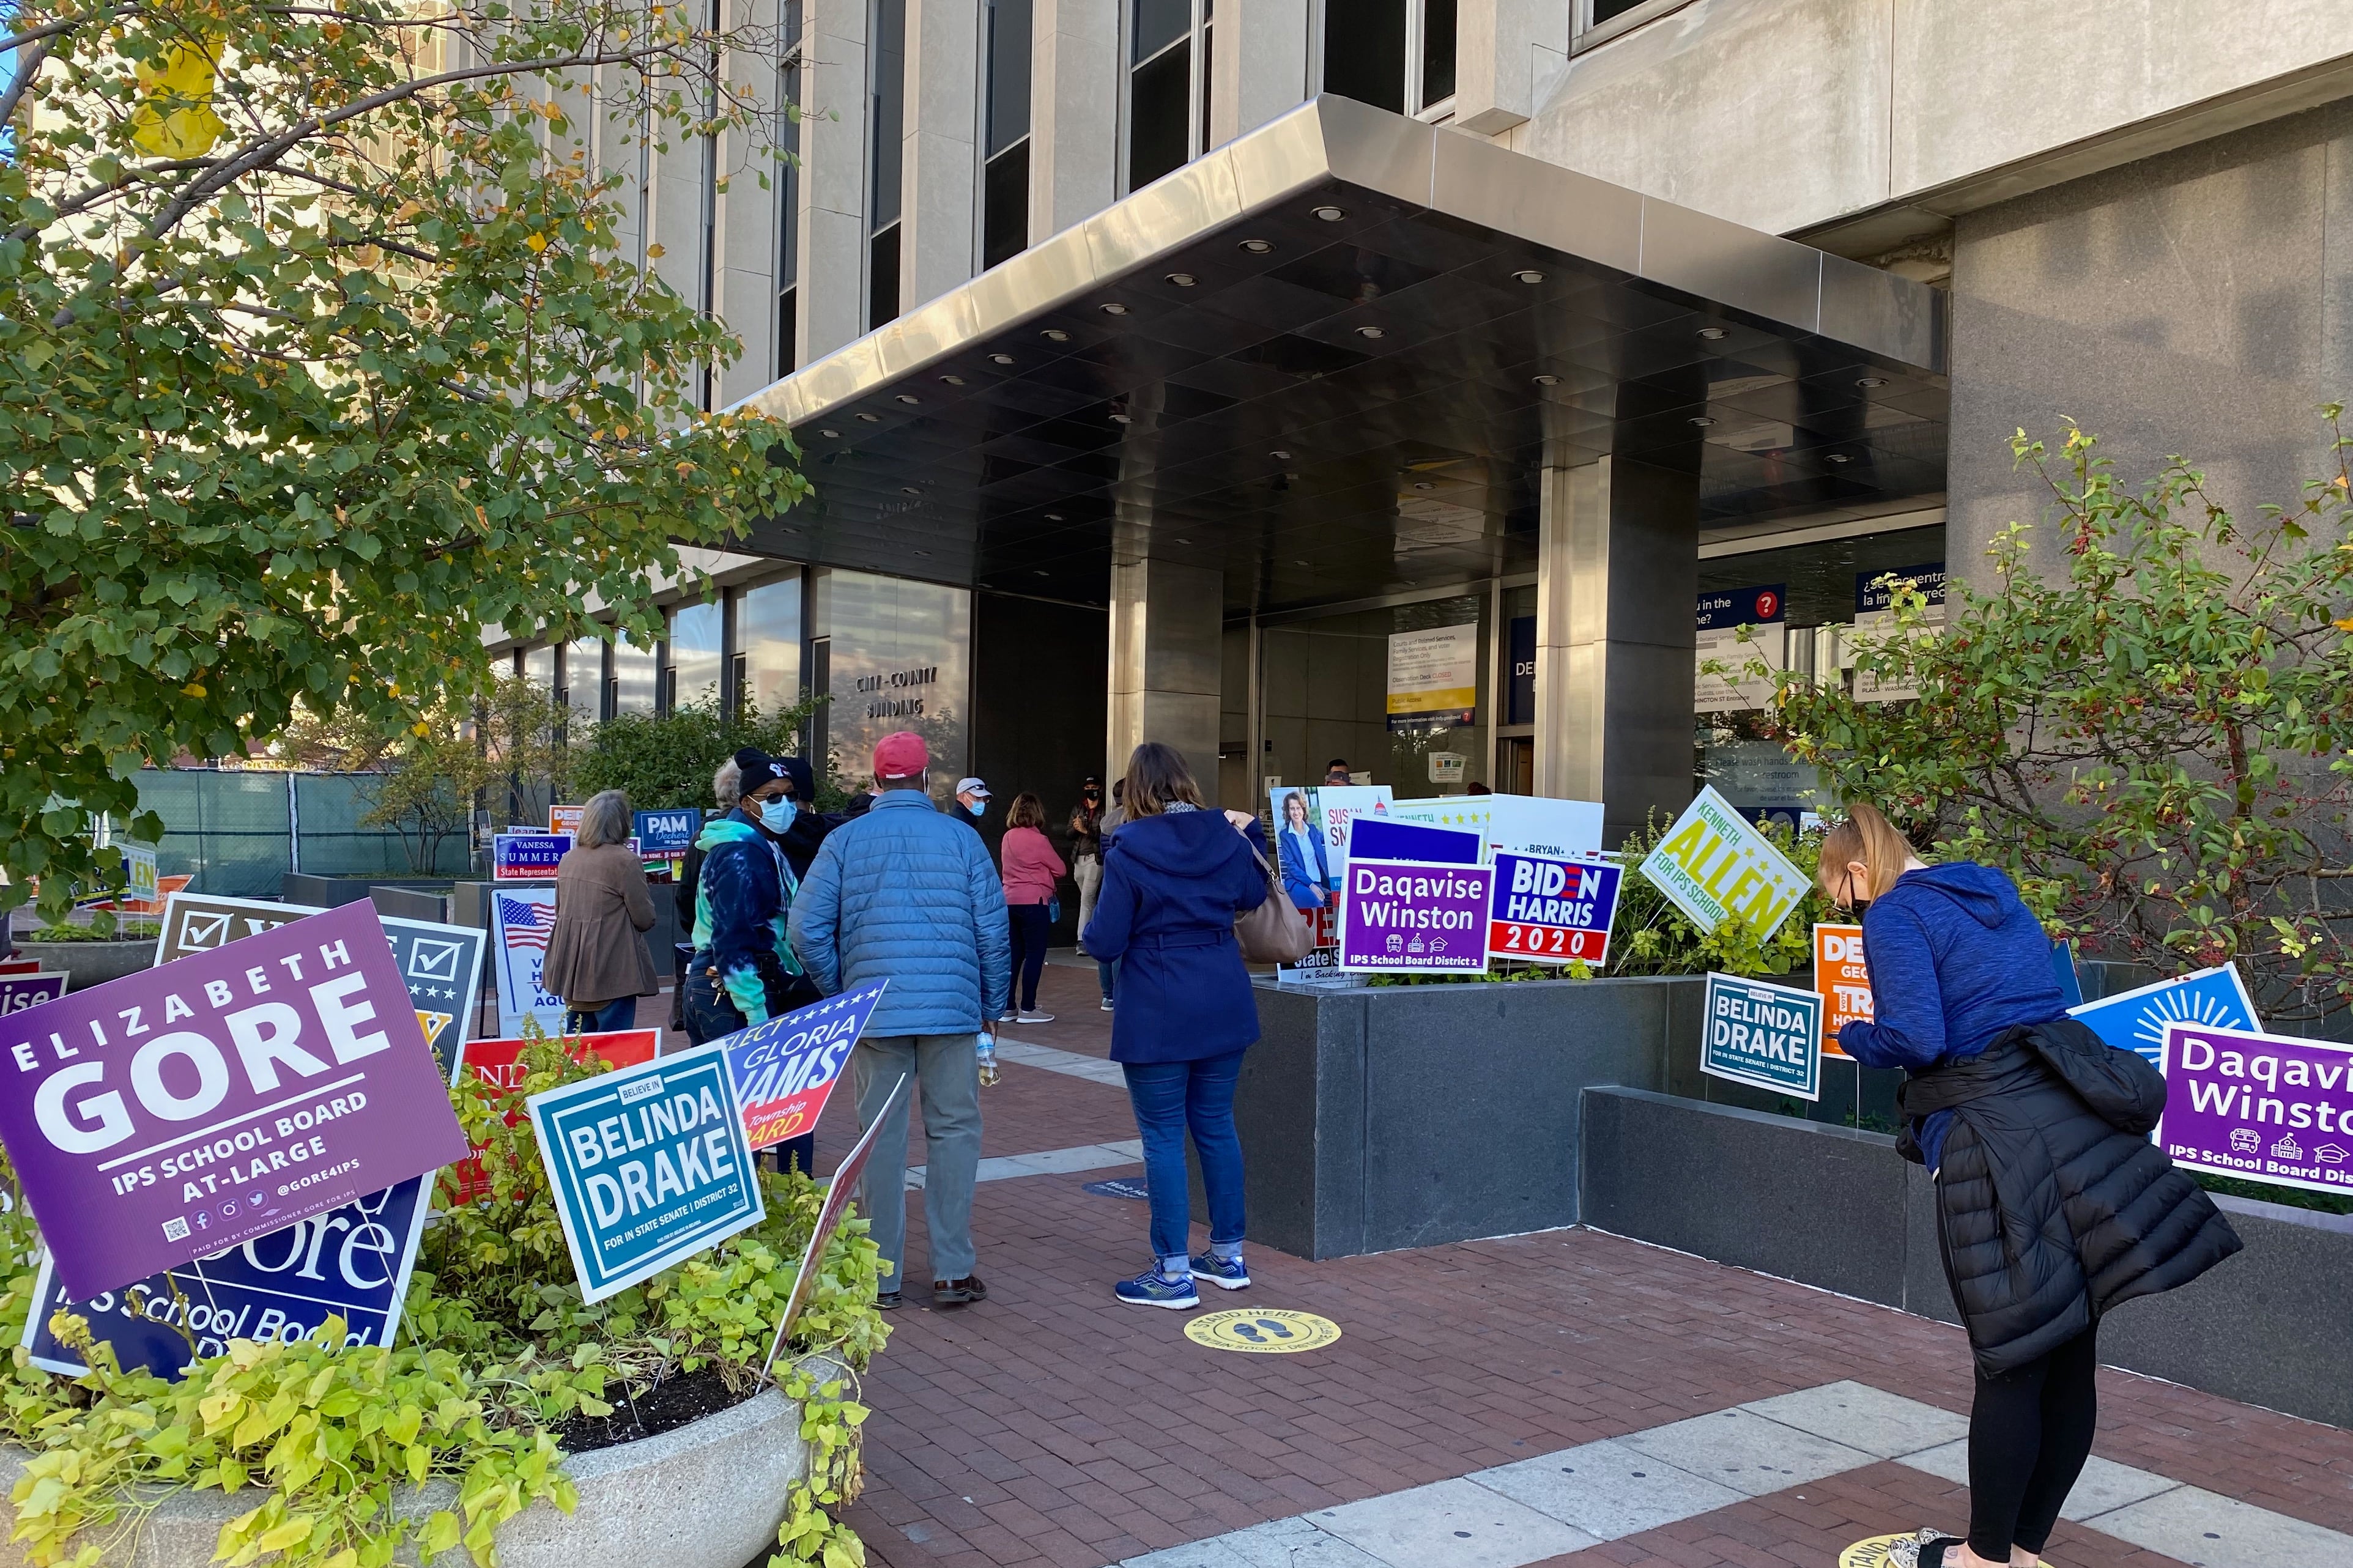 Early voters wait in line outside the Indianapolis City-County Building for the 2020 election.